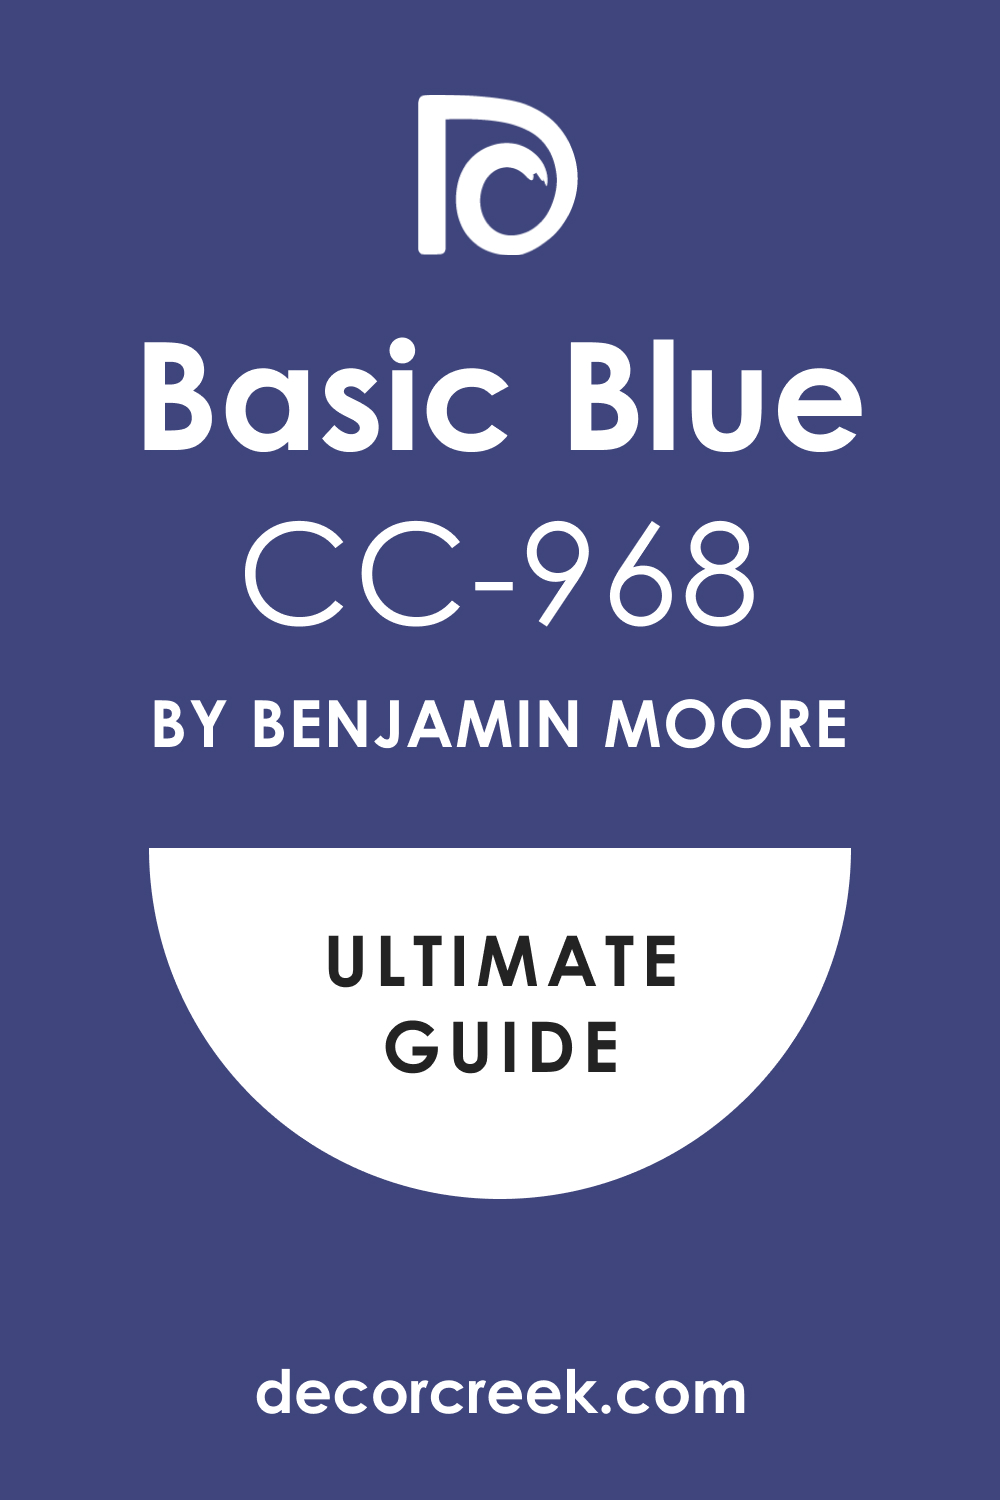 Ultimate Guide. Basic Blue CC-968 Paint Color by Benjamin Moore